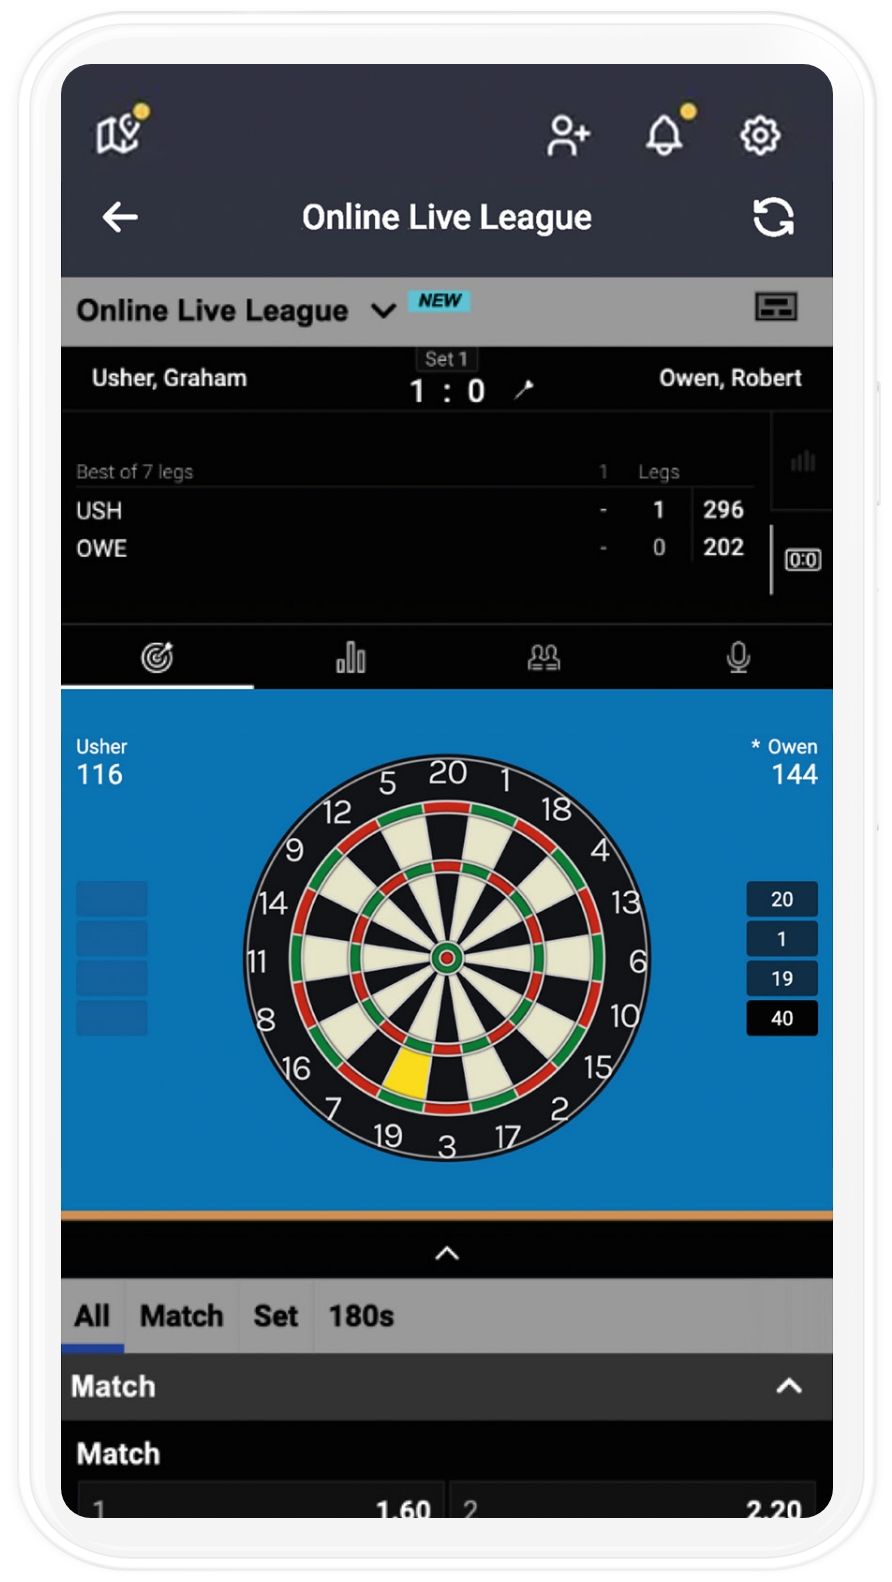 mobile mockup of the Online Live League in the Dart App